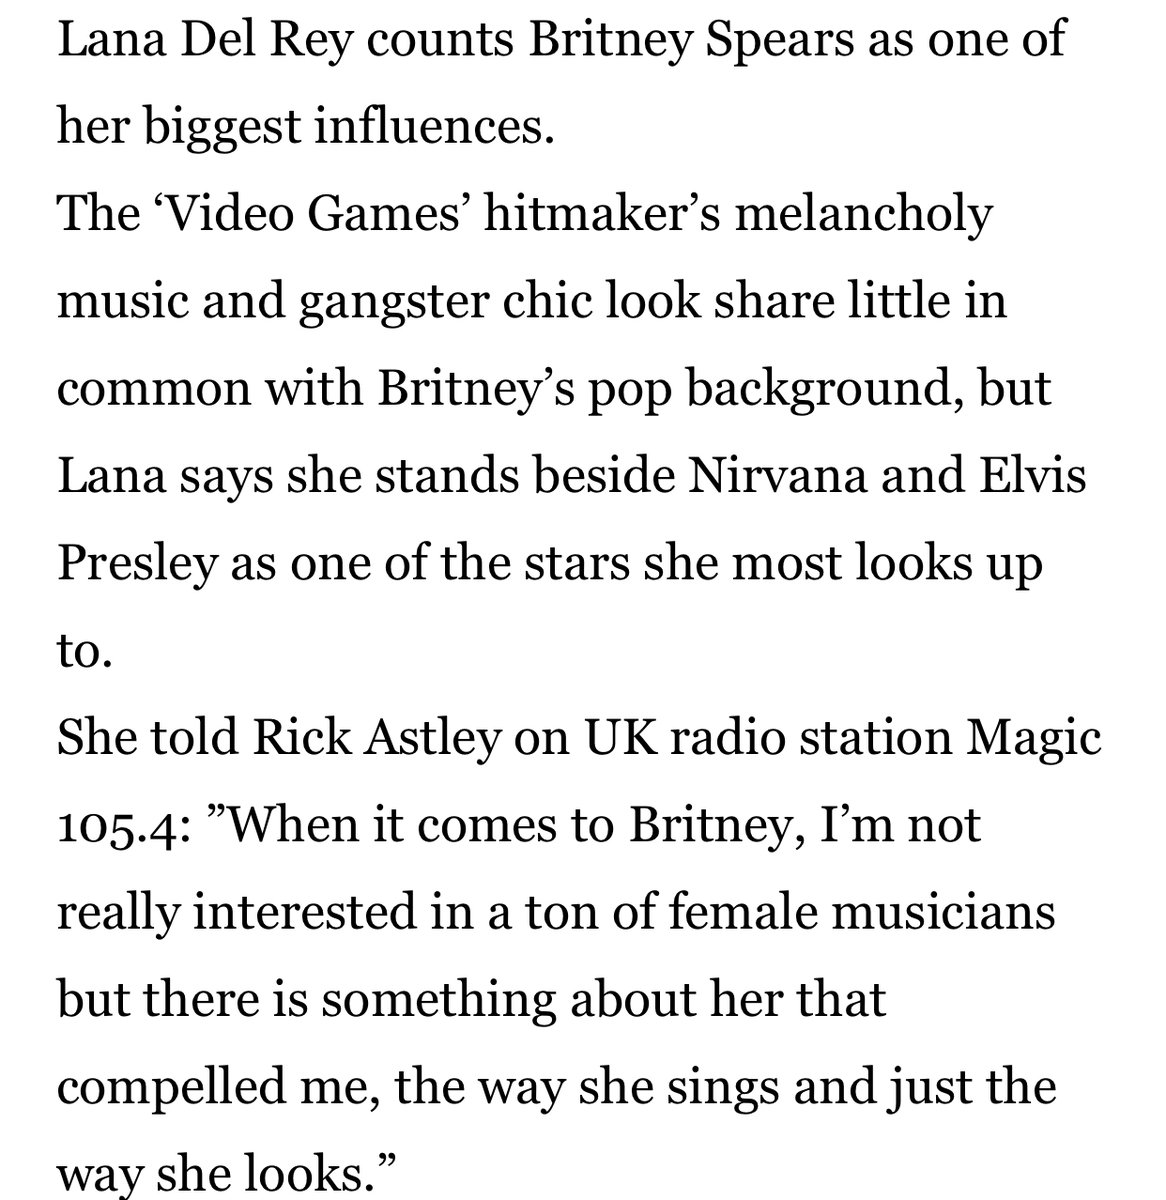 Lana Del Rey has cited Britney as one of her biggest influences. “I'm not really interested in a ton of female musicians but there is something about Britney that compelled me."